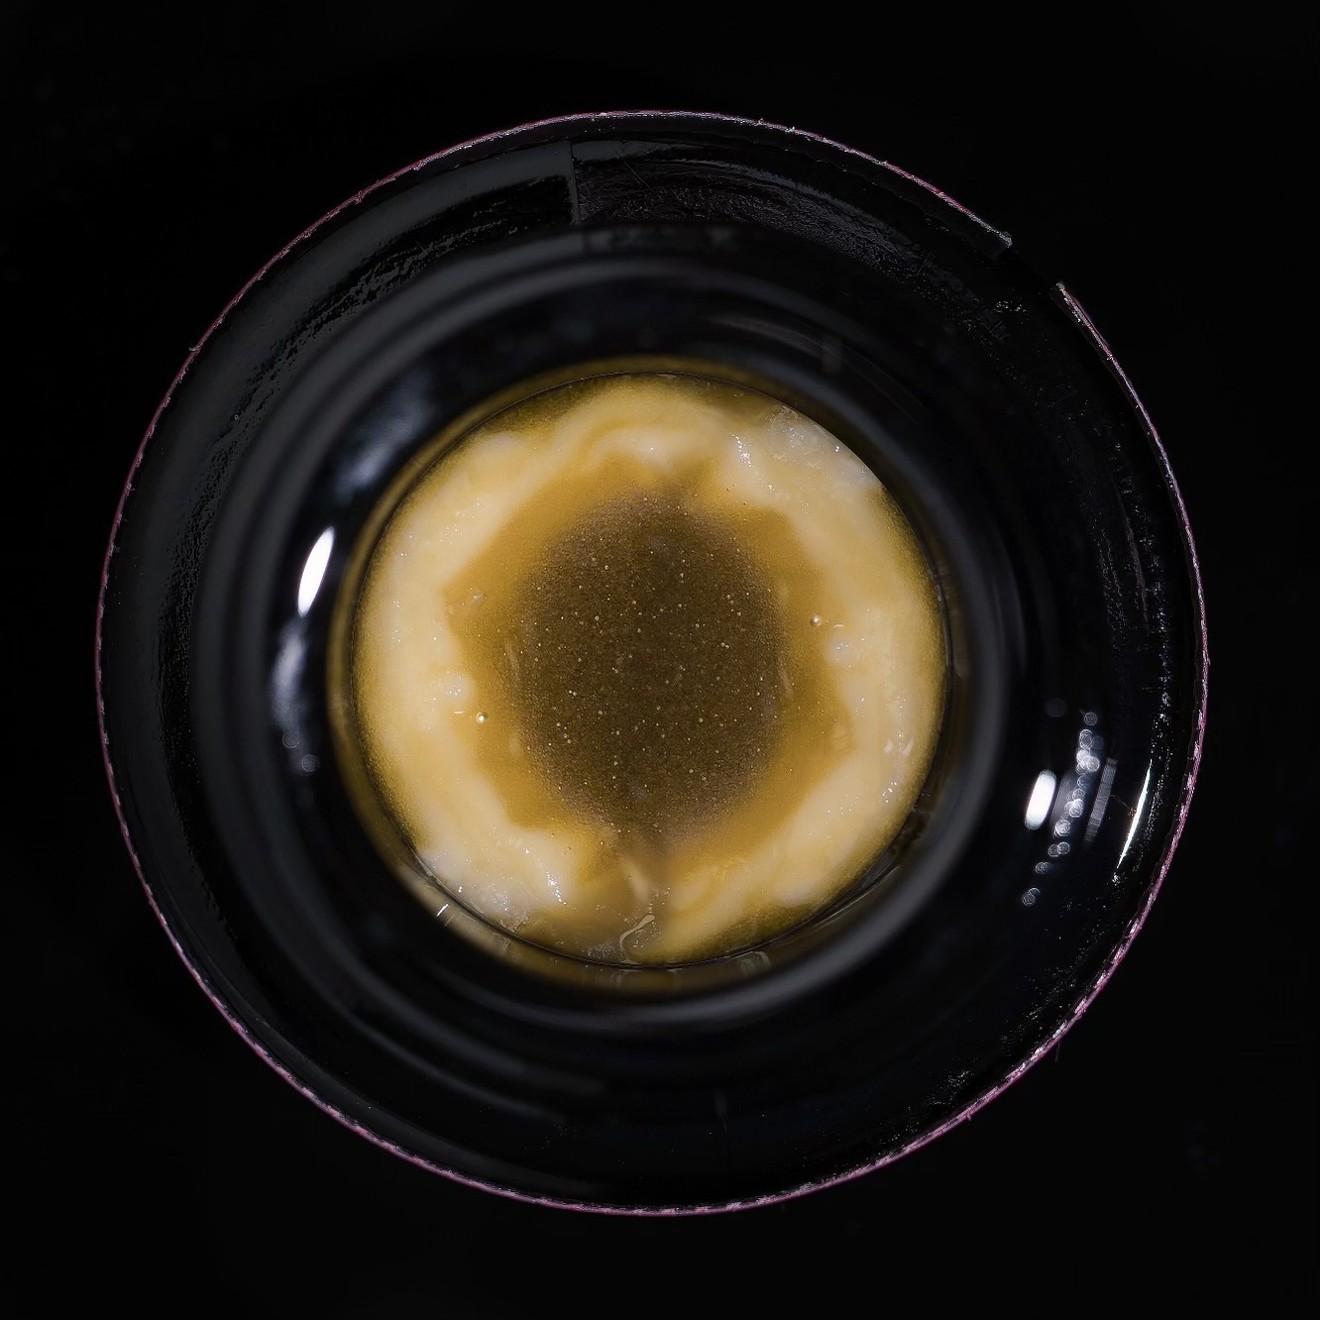 A rosin Geode from Malek's Melts combines cold cure and jam (also known as sauce) for a flavorful hit.